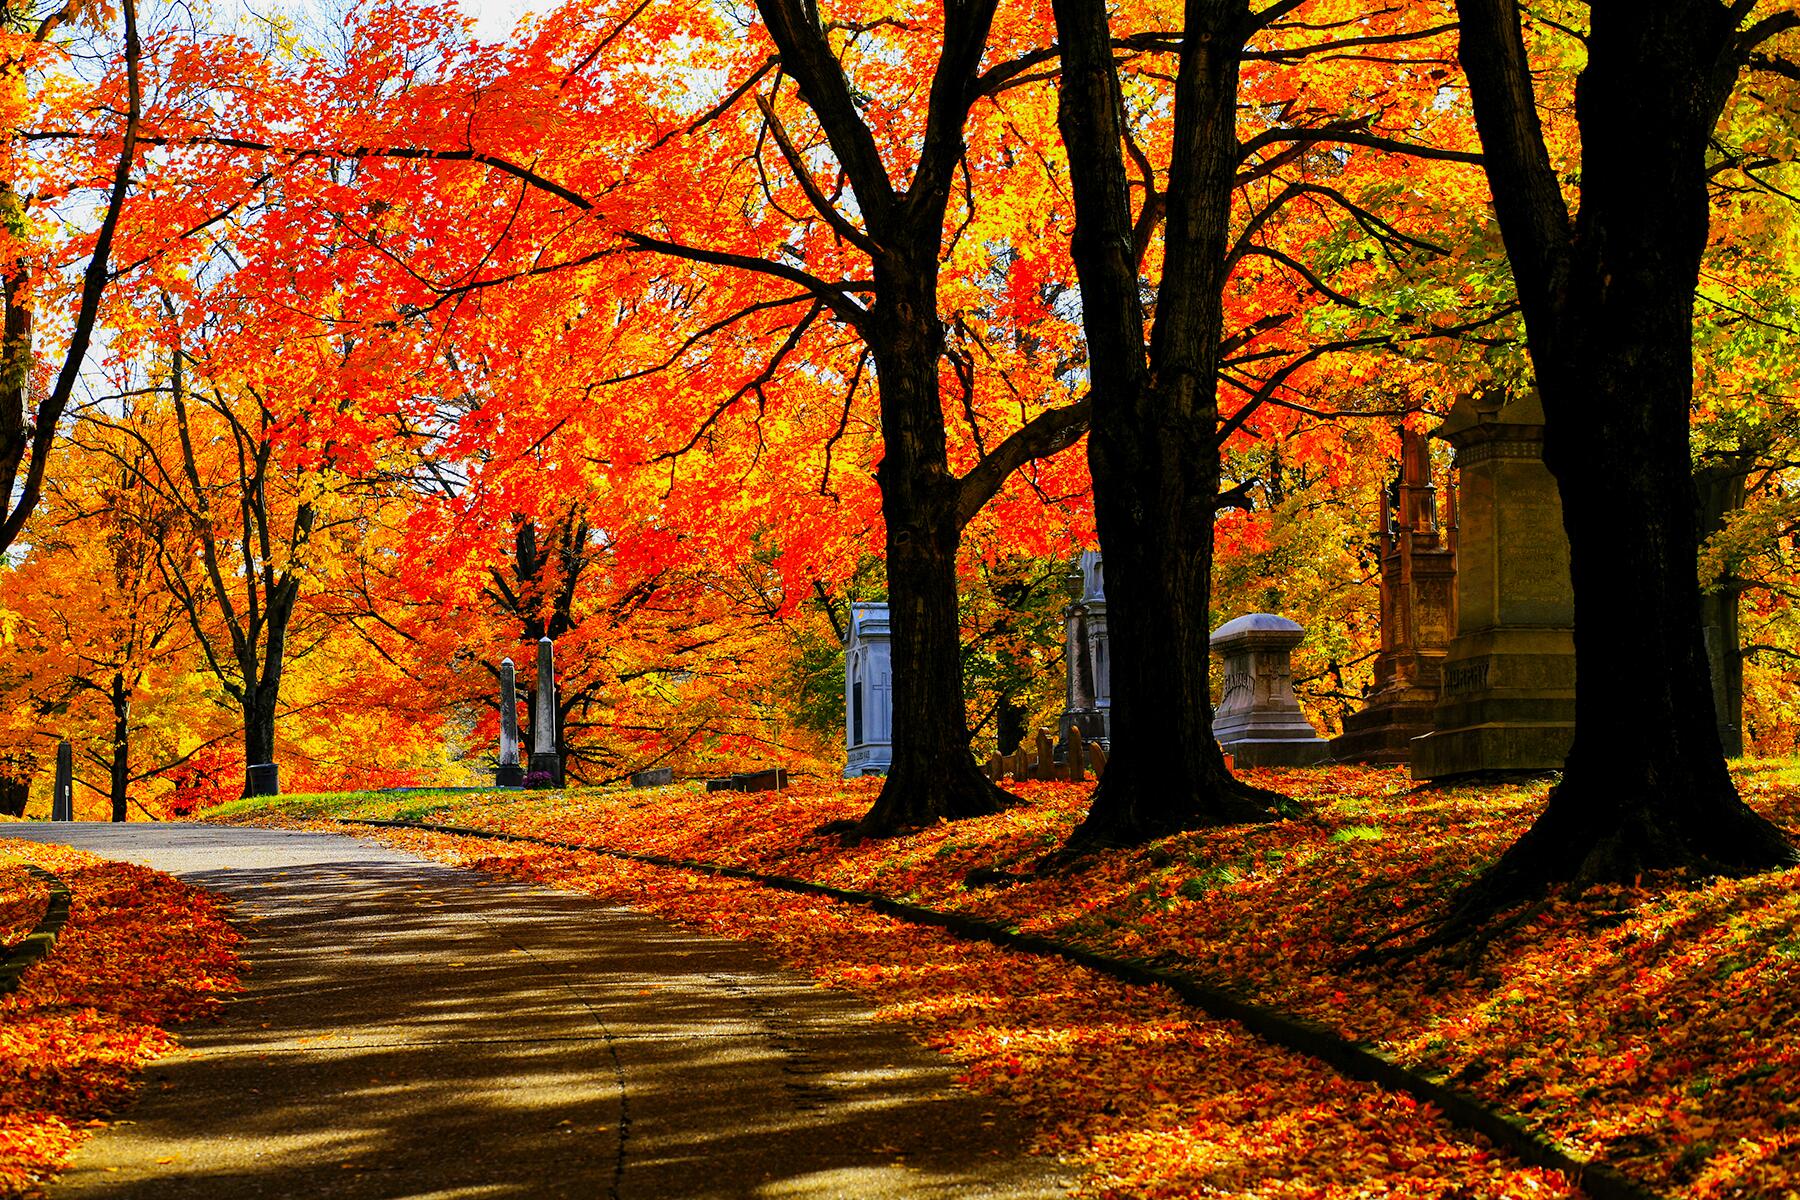 Where to See the Best Fall Leaves in the U.S.